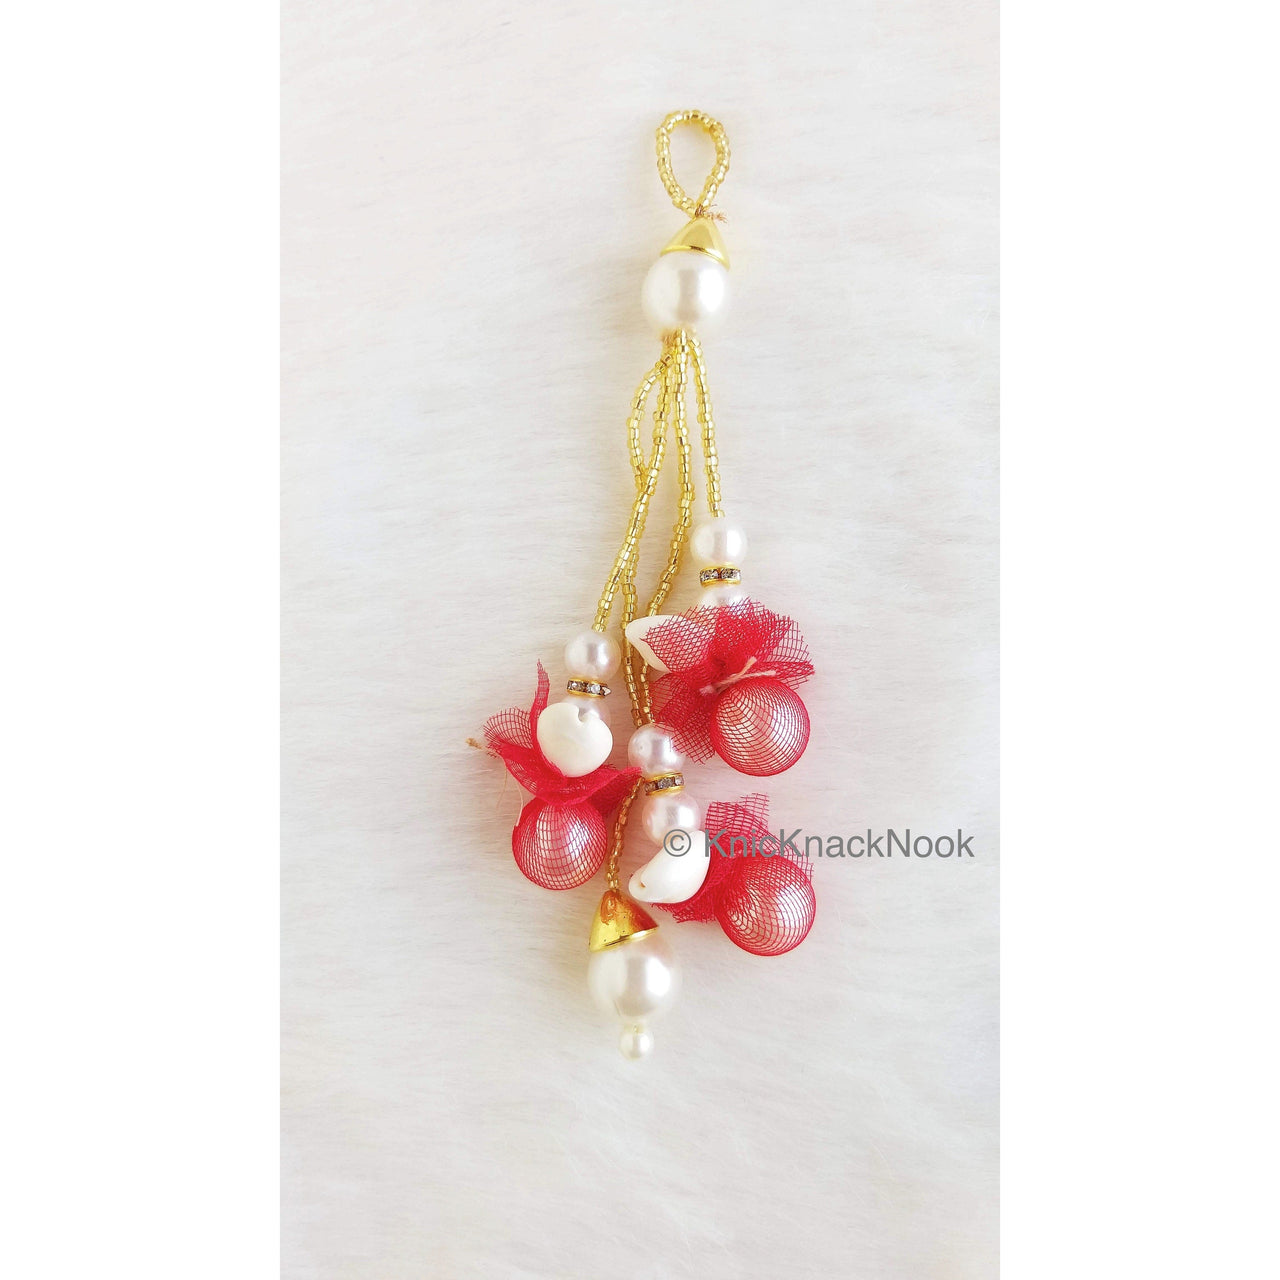 Tassels of Pearl And Cowrie Conch Shell, Pearls And Gold Beads With Net, Indian Tassels